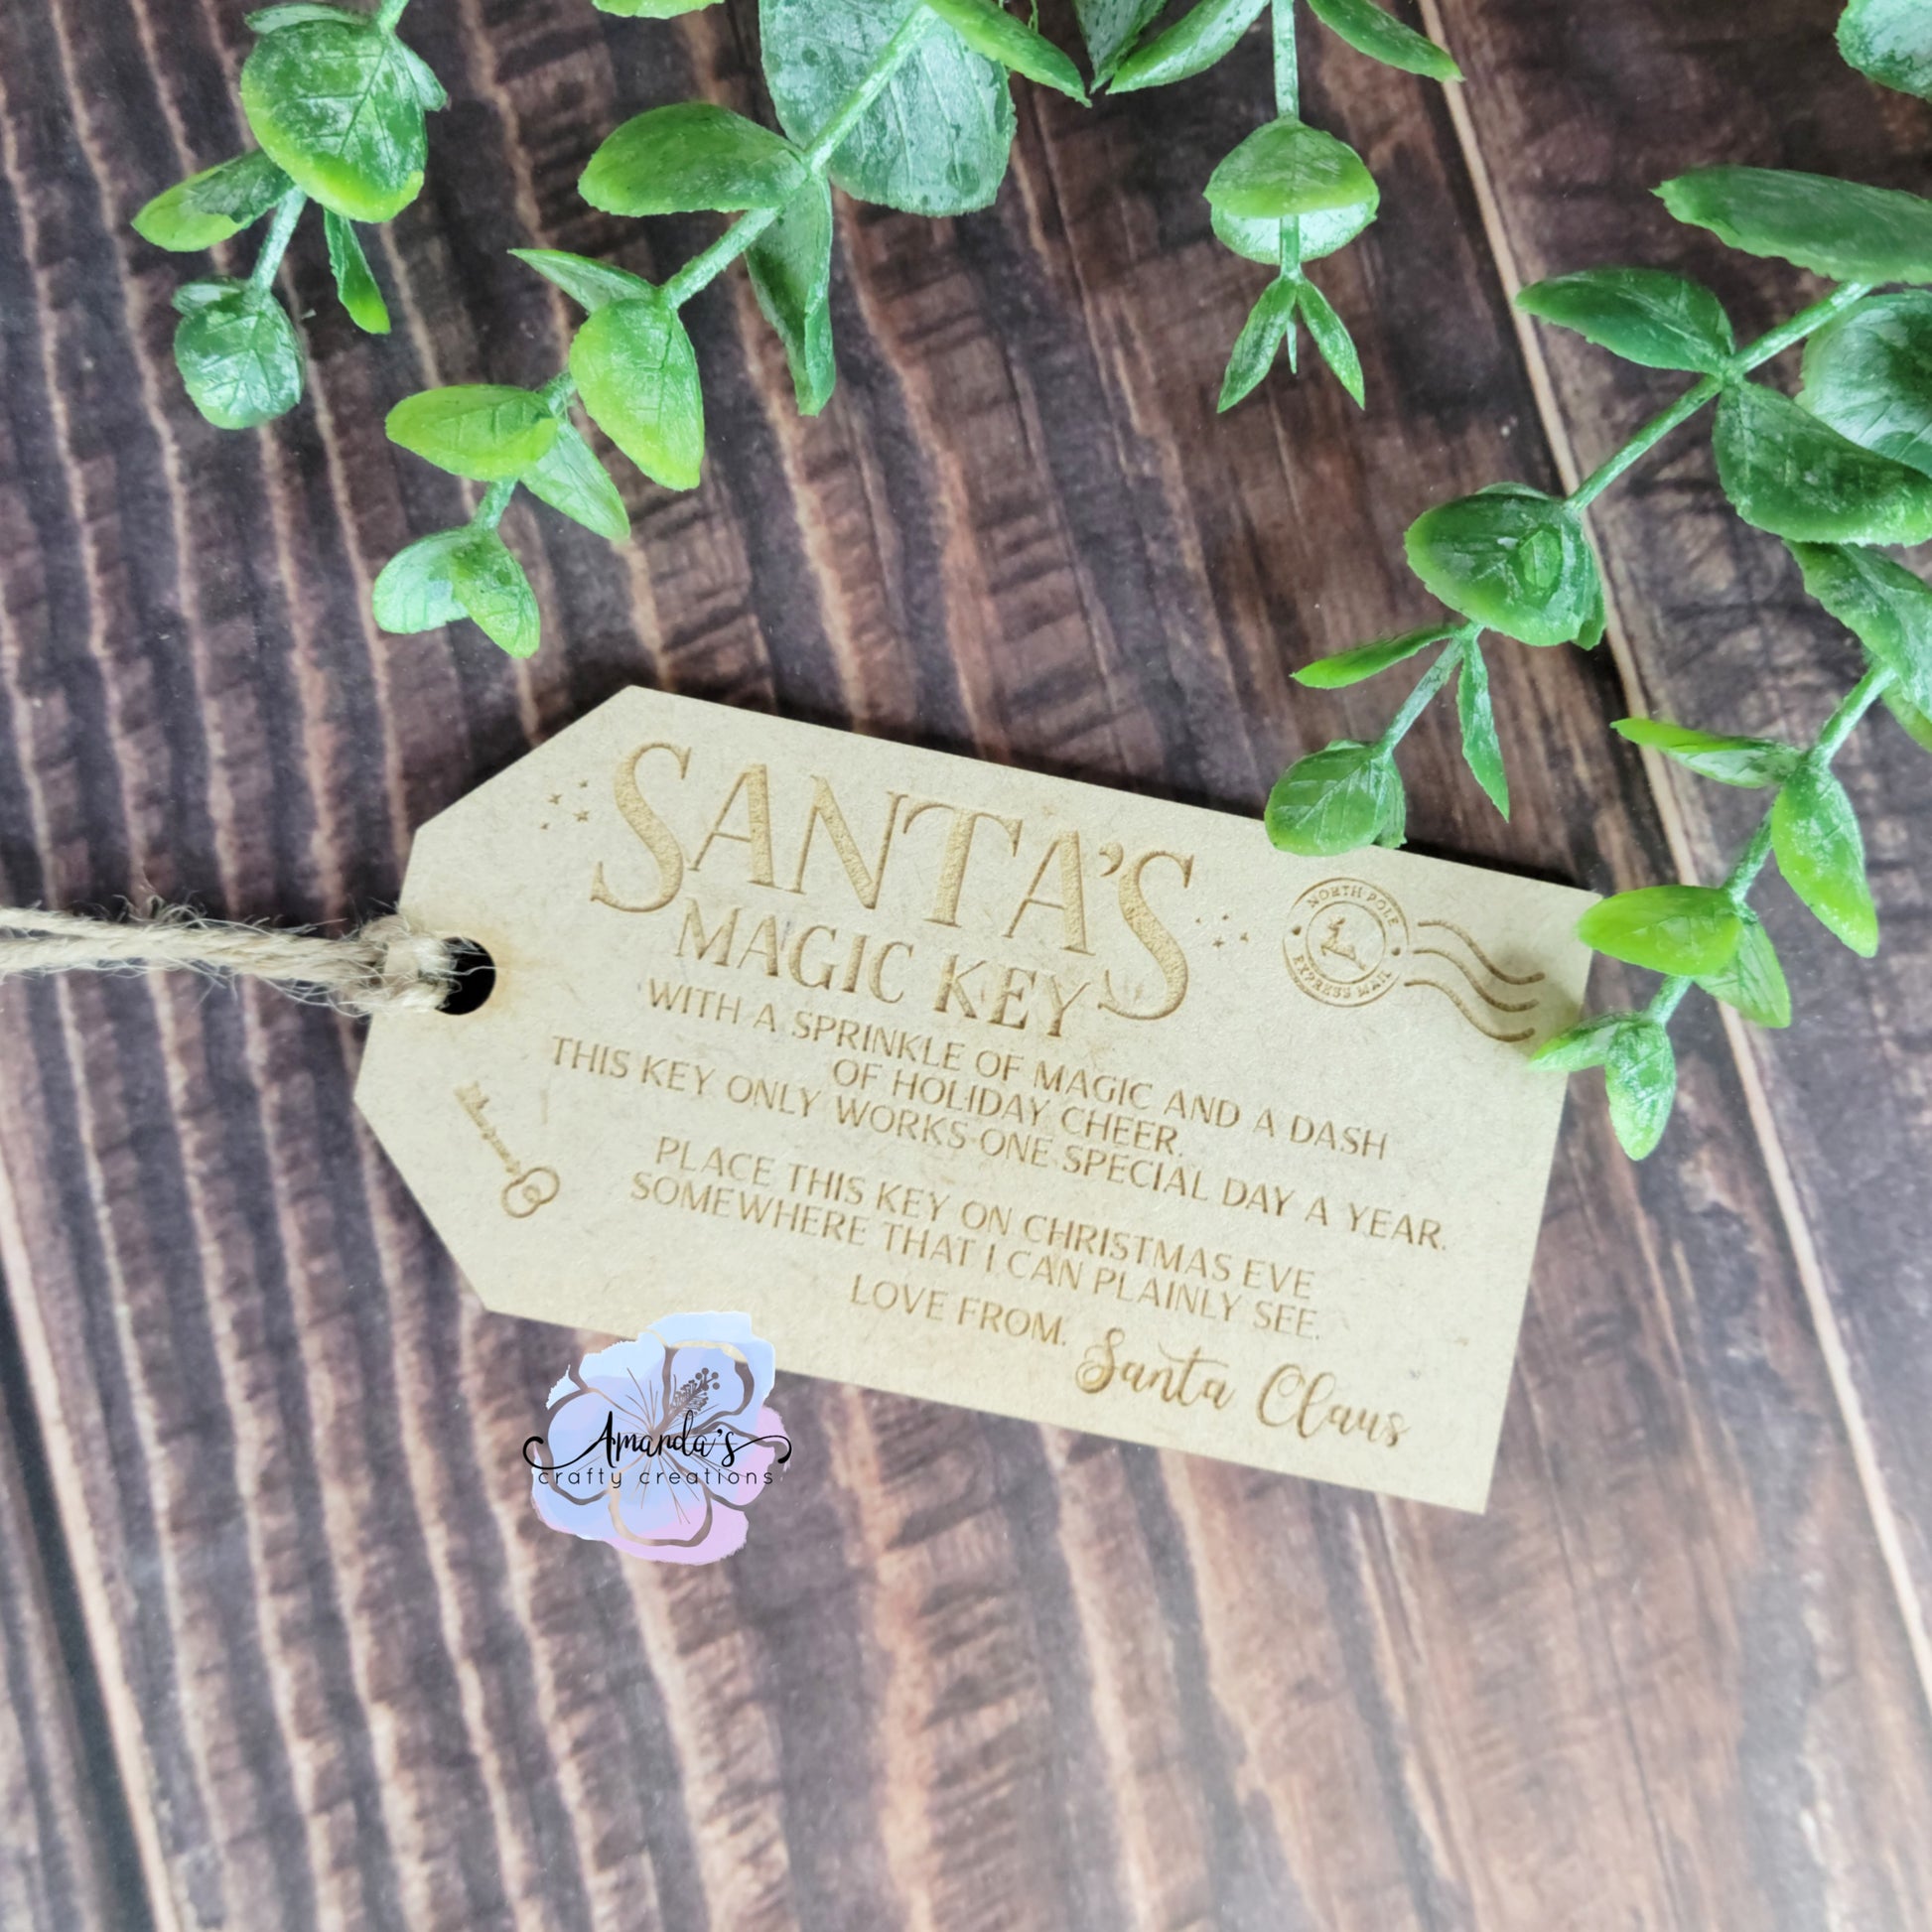 Santa's magic key with a sprinkle of magic and a dash of holiday cheer, this key only works one special day a year. Place this key on Christmas Eve somewhere that I can plainly see. Wooden keychain